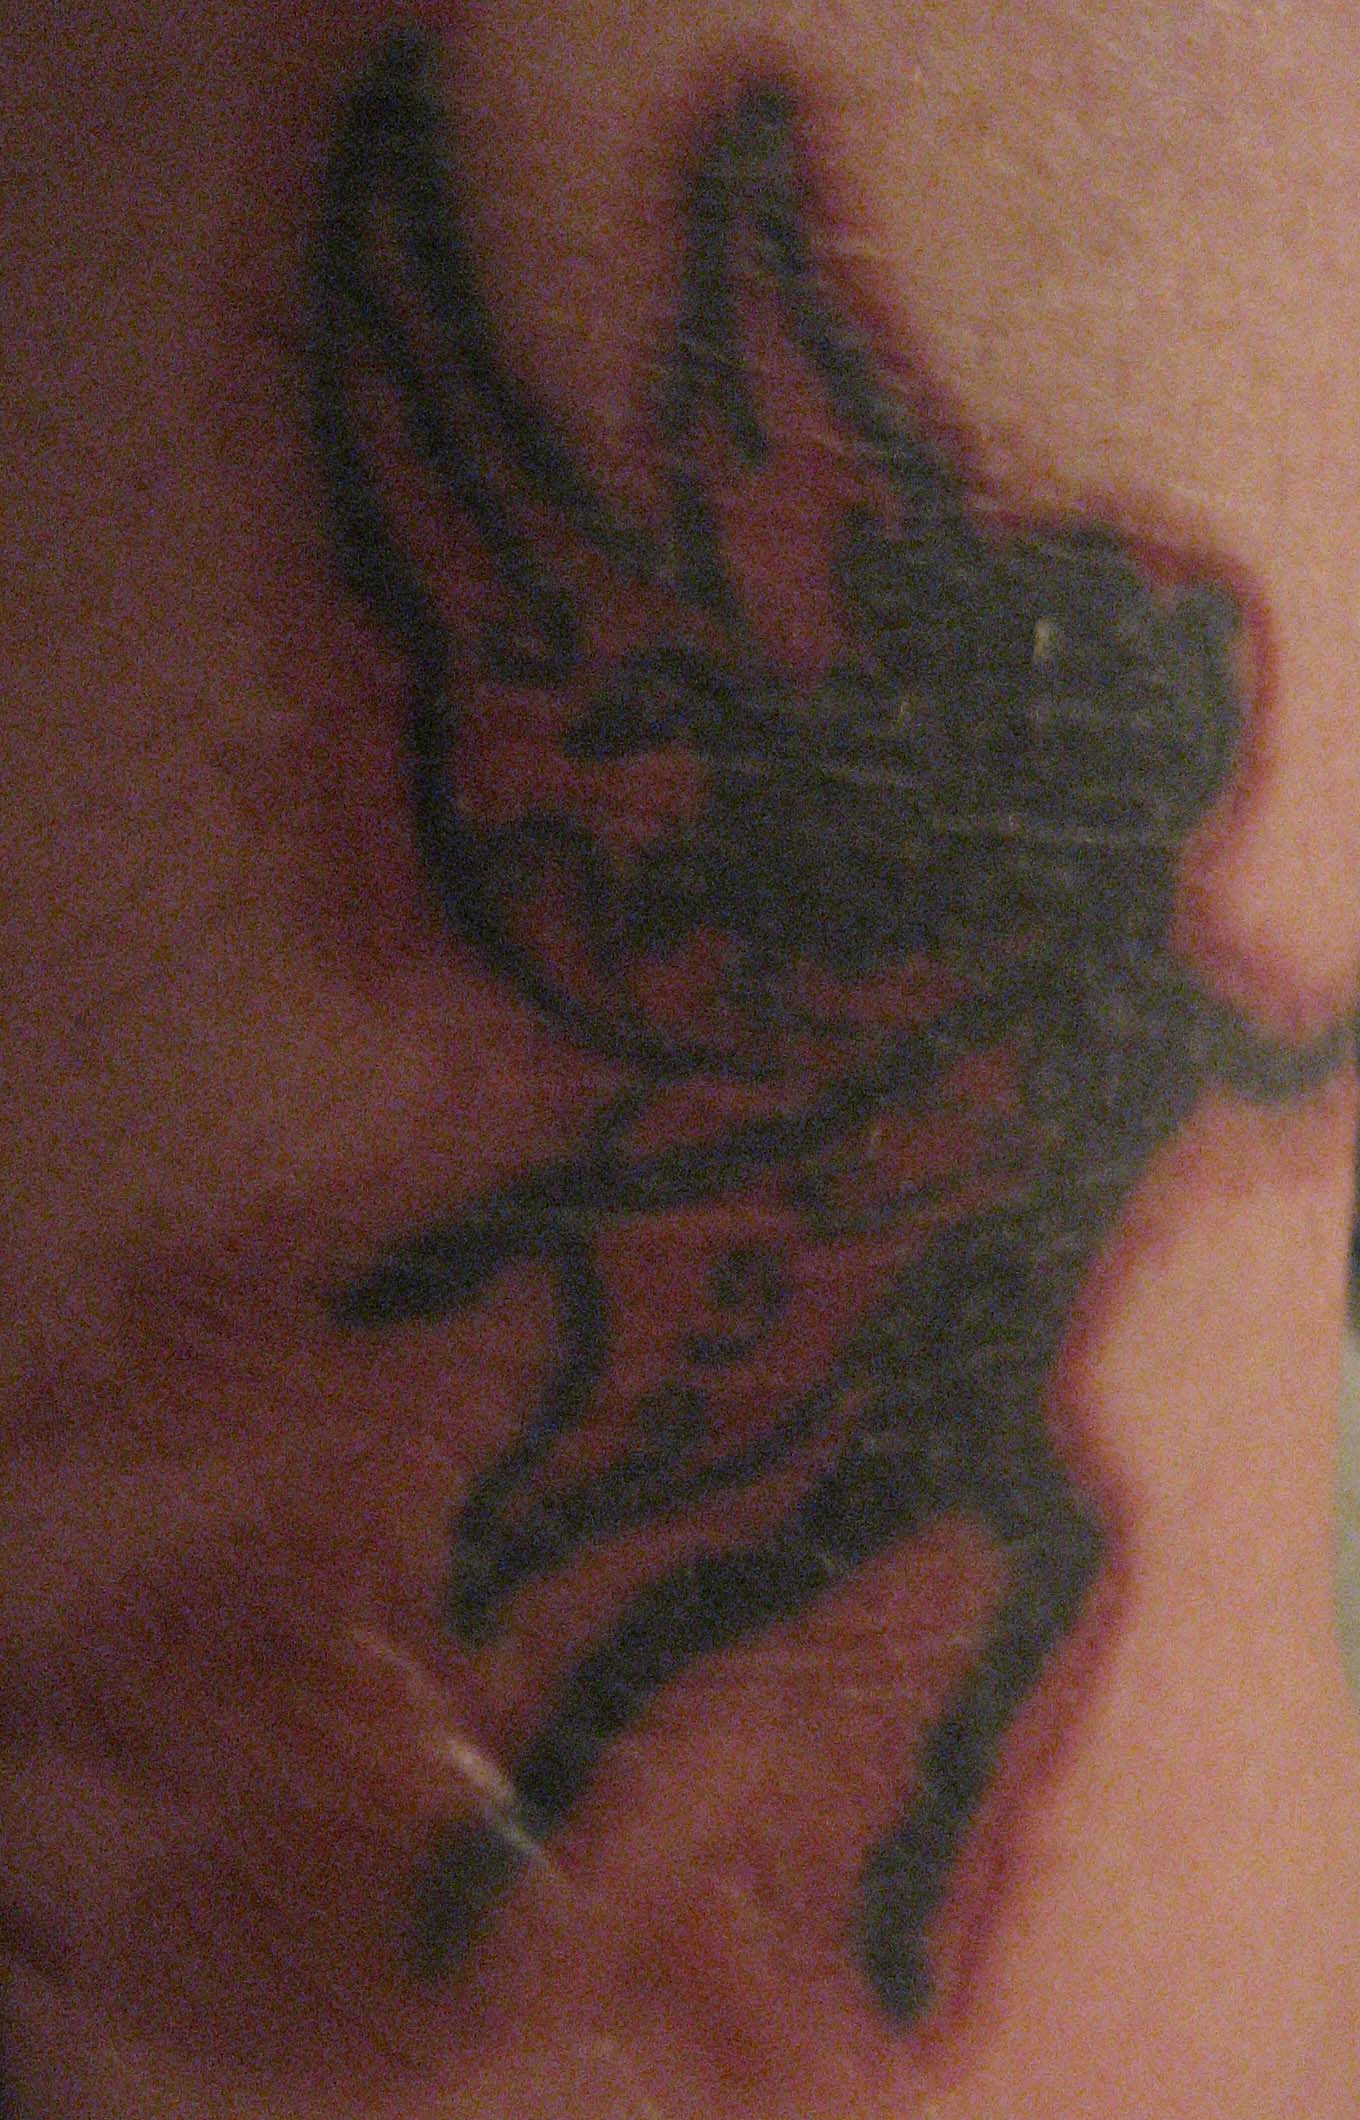 Angel Tattoos - What Represent